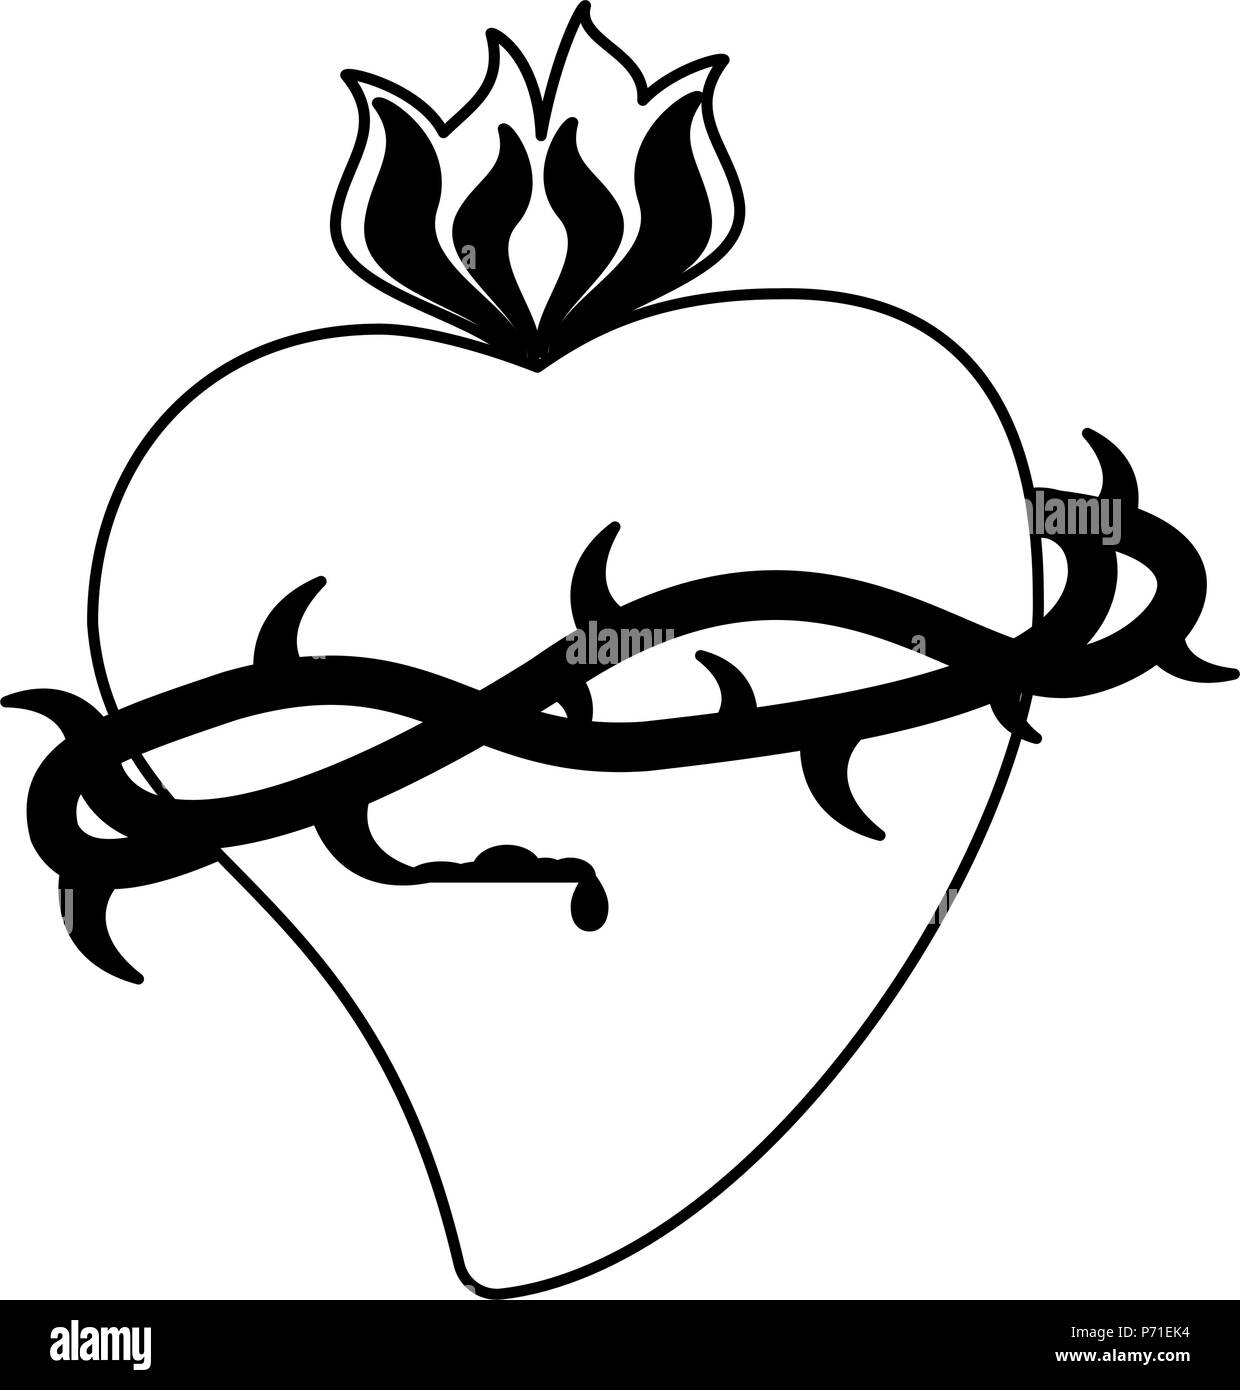 Catholic sacred heart in black and white Stock Vector